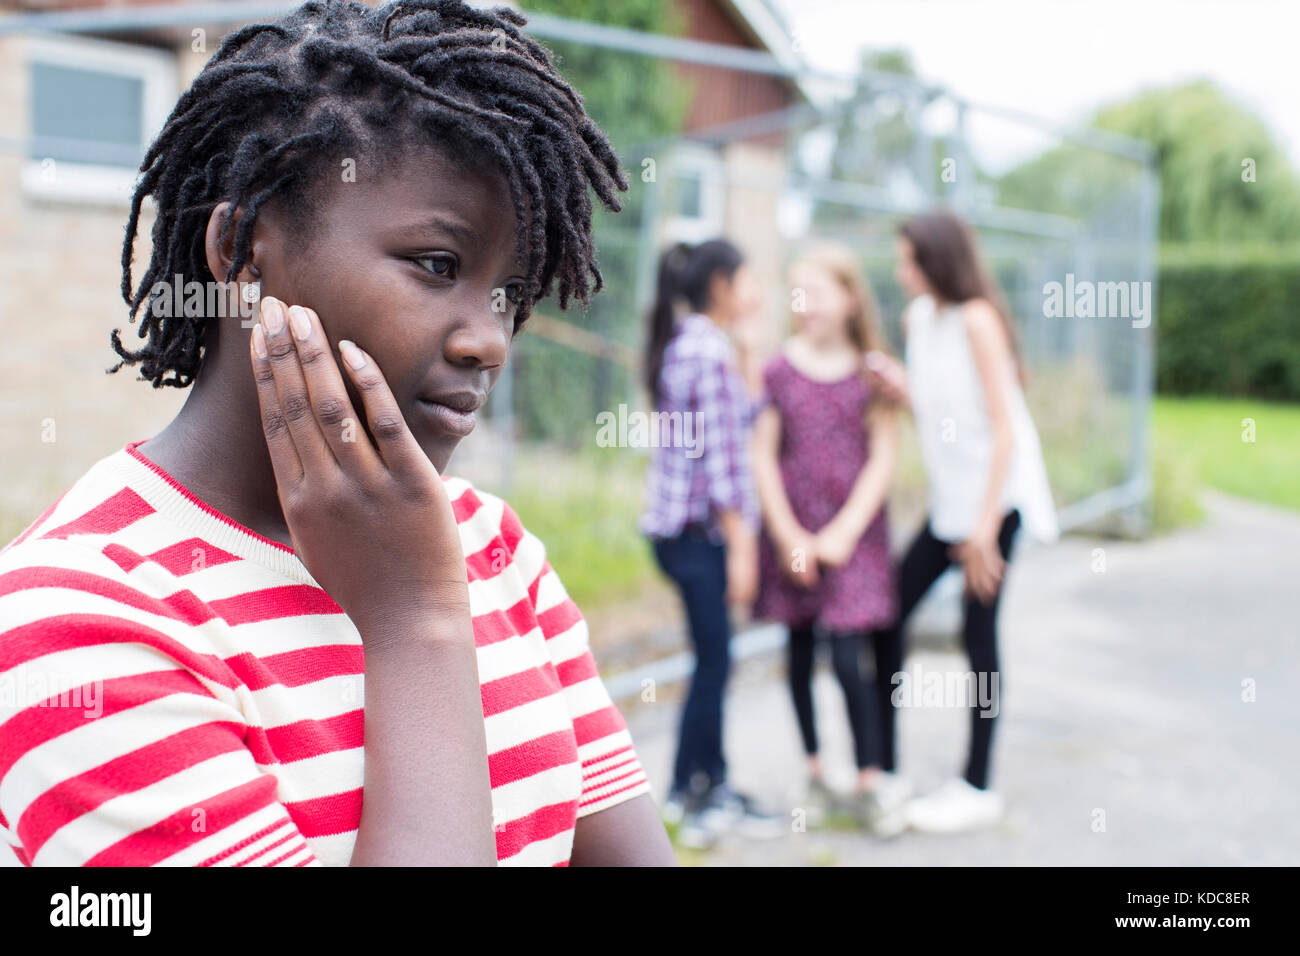 Sad Teenage Girl Feeling Left Out By Friends Stock Photo